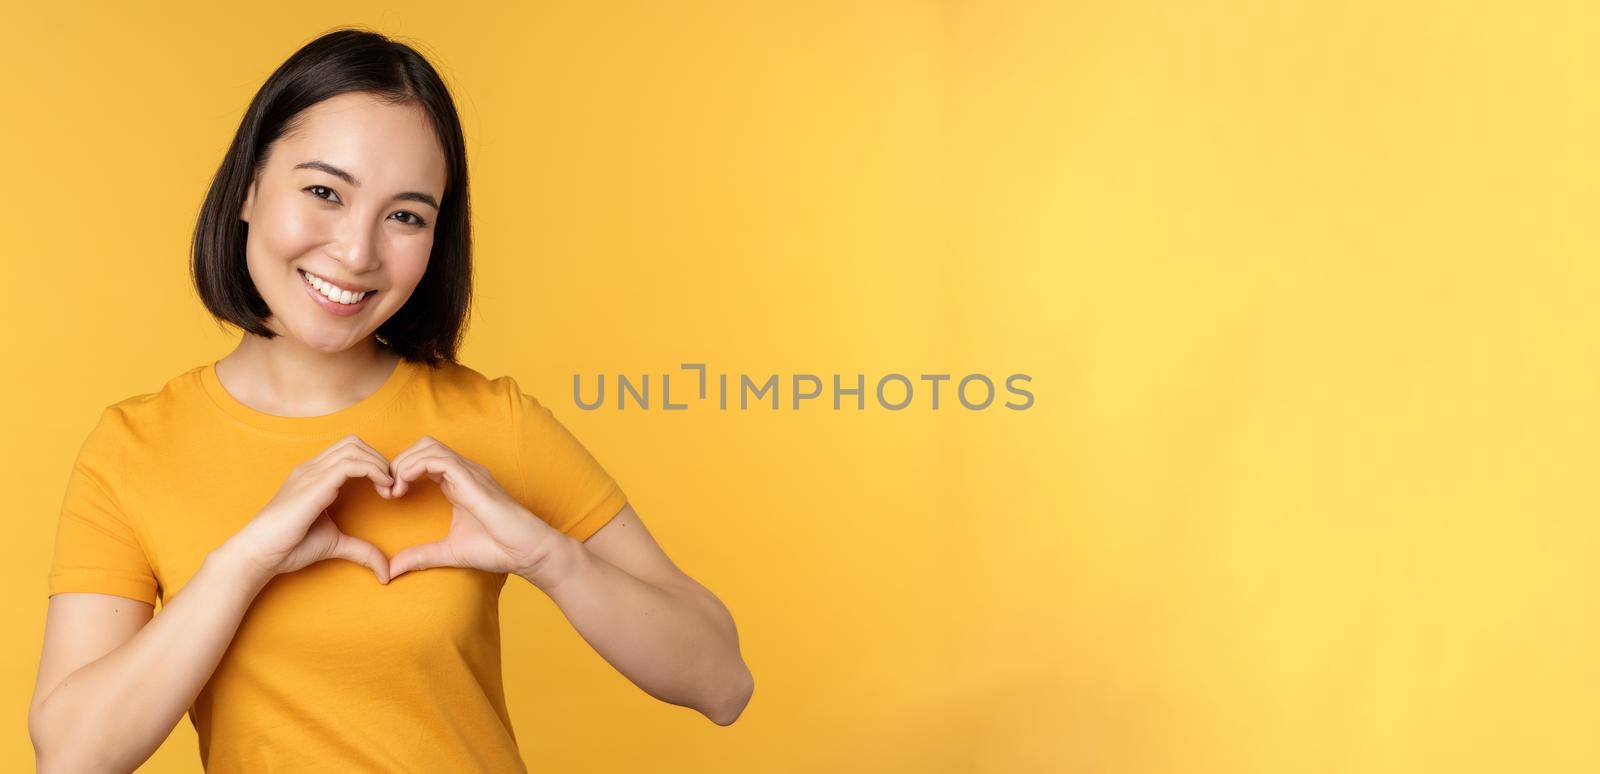 Beautiful asian girl showing heart, love gesture and smiling white teeth, express care and sympathy, standing over yellow background.